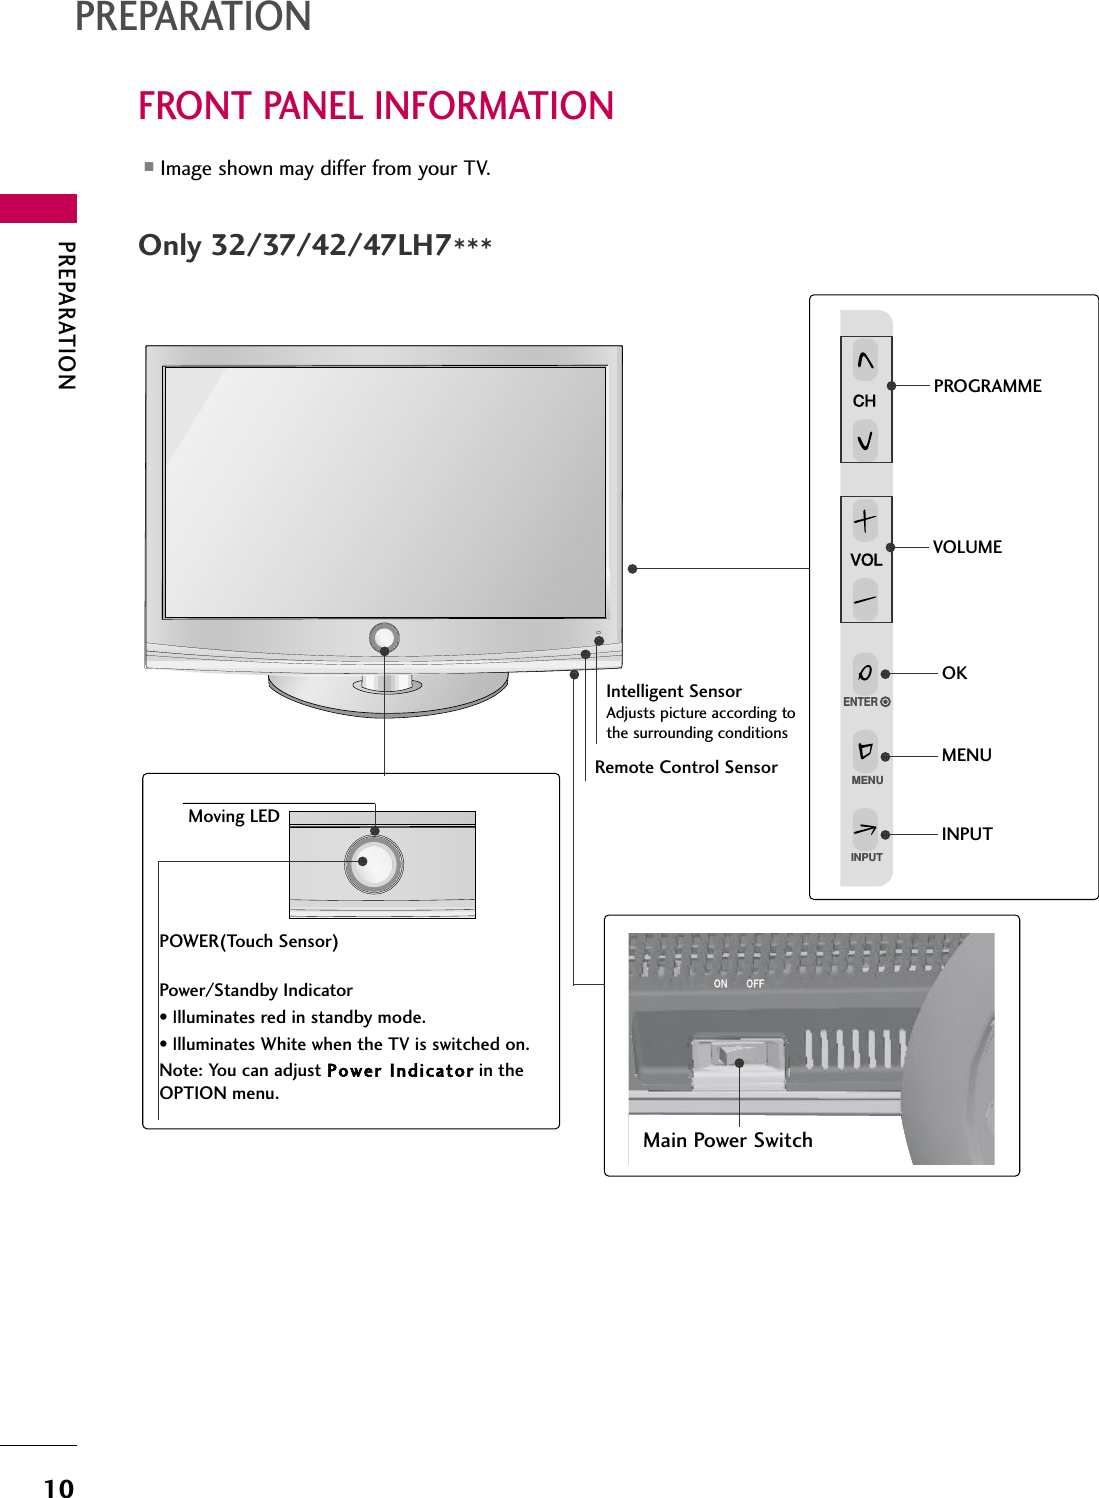 PREPARATION10FRONT PANEL INFORMATIONPREPARATION■Image shown may differ from your TV.Only 32/37/42/47LH7***ENTERMENUINPUTCHVOLPROGRAMMEVOLUMEOKMENUINPUTIntelligent SensorAdjusts picture according tothe surrounding conditions POWER(Touch Sensor) Power/Standby Indicator• Illuminates red in standby mode.• Illuminates White when the TV is switched on.Note: You can adjust Power Indicator in theOPTION menu.Moving LEDMain Power SwitchRemote Control Sensor